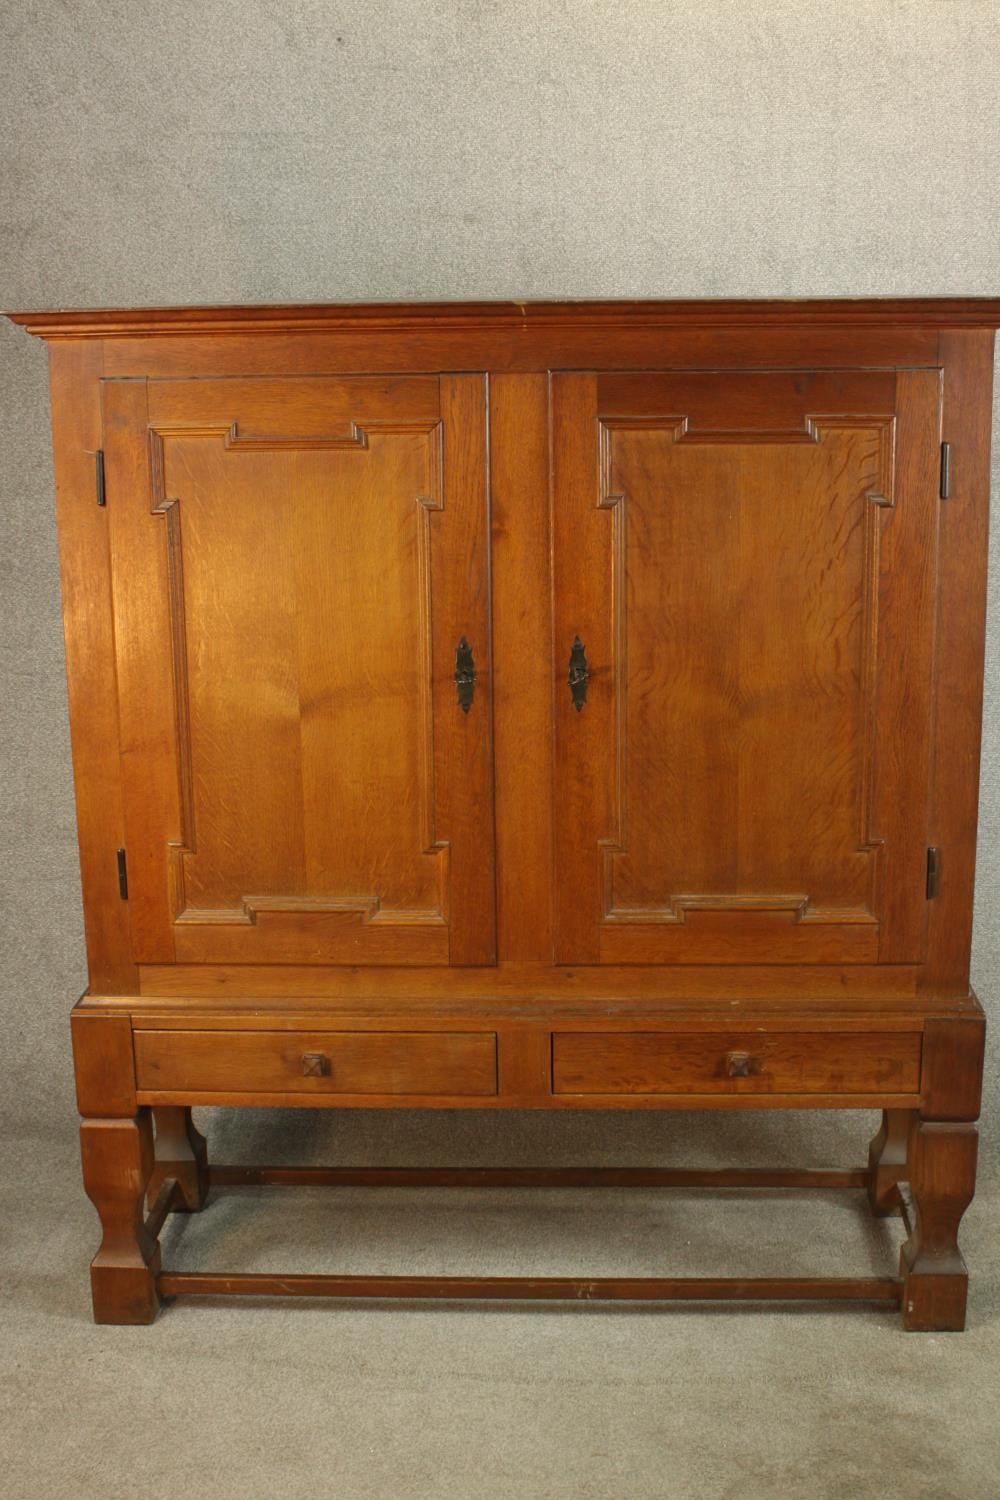 A late 19th century oak two door cupboard with two drawers below, raised on heavily carved